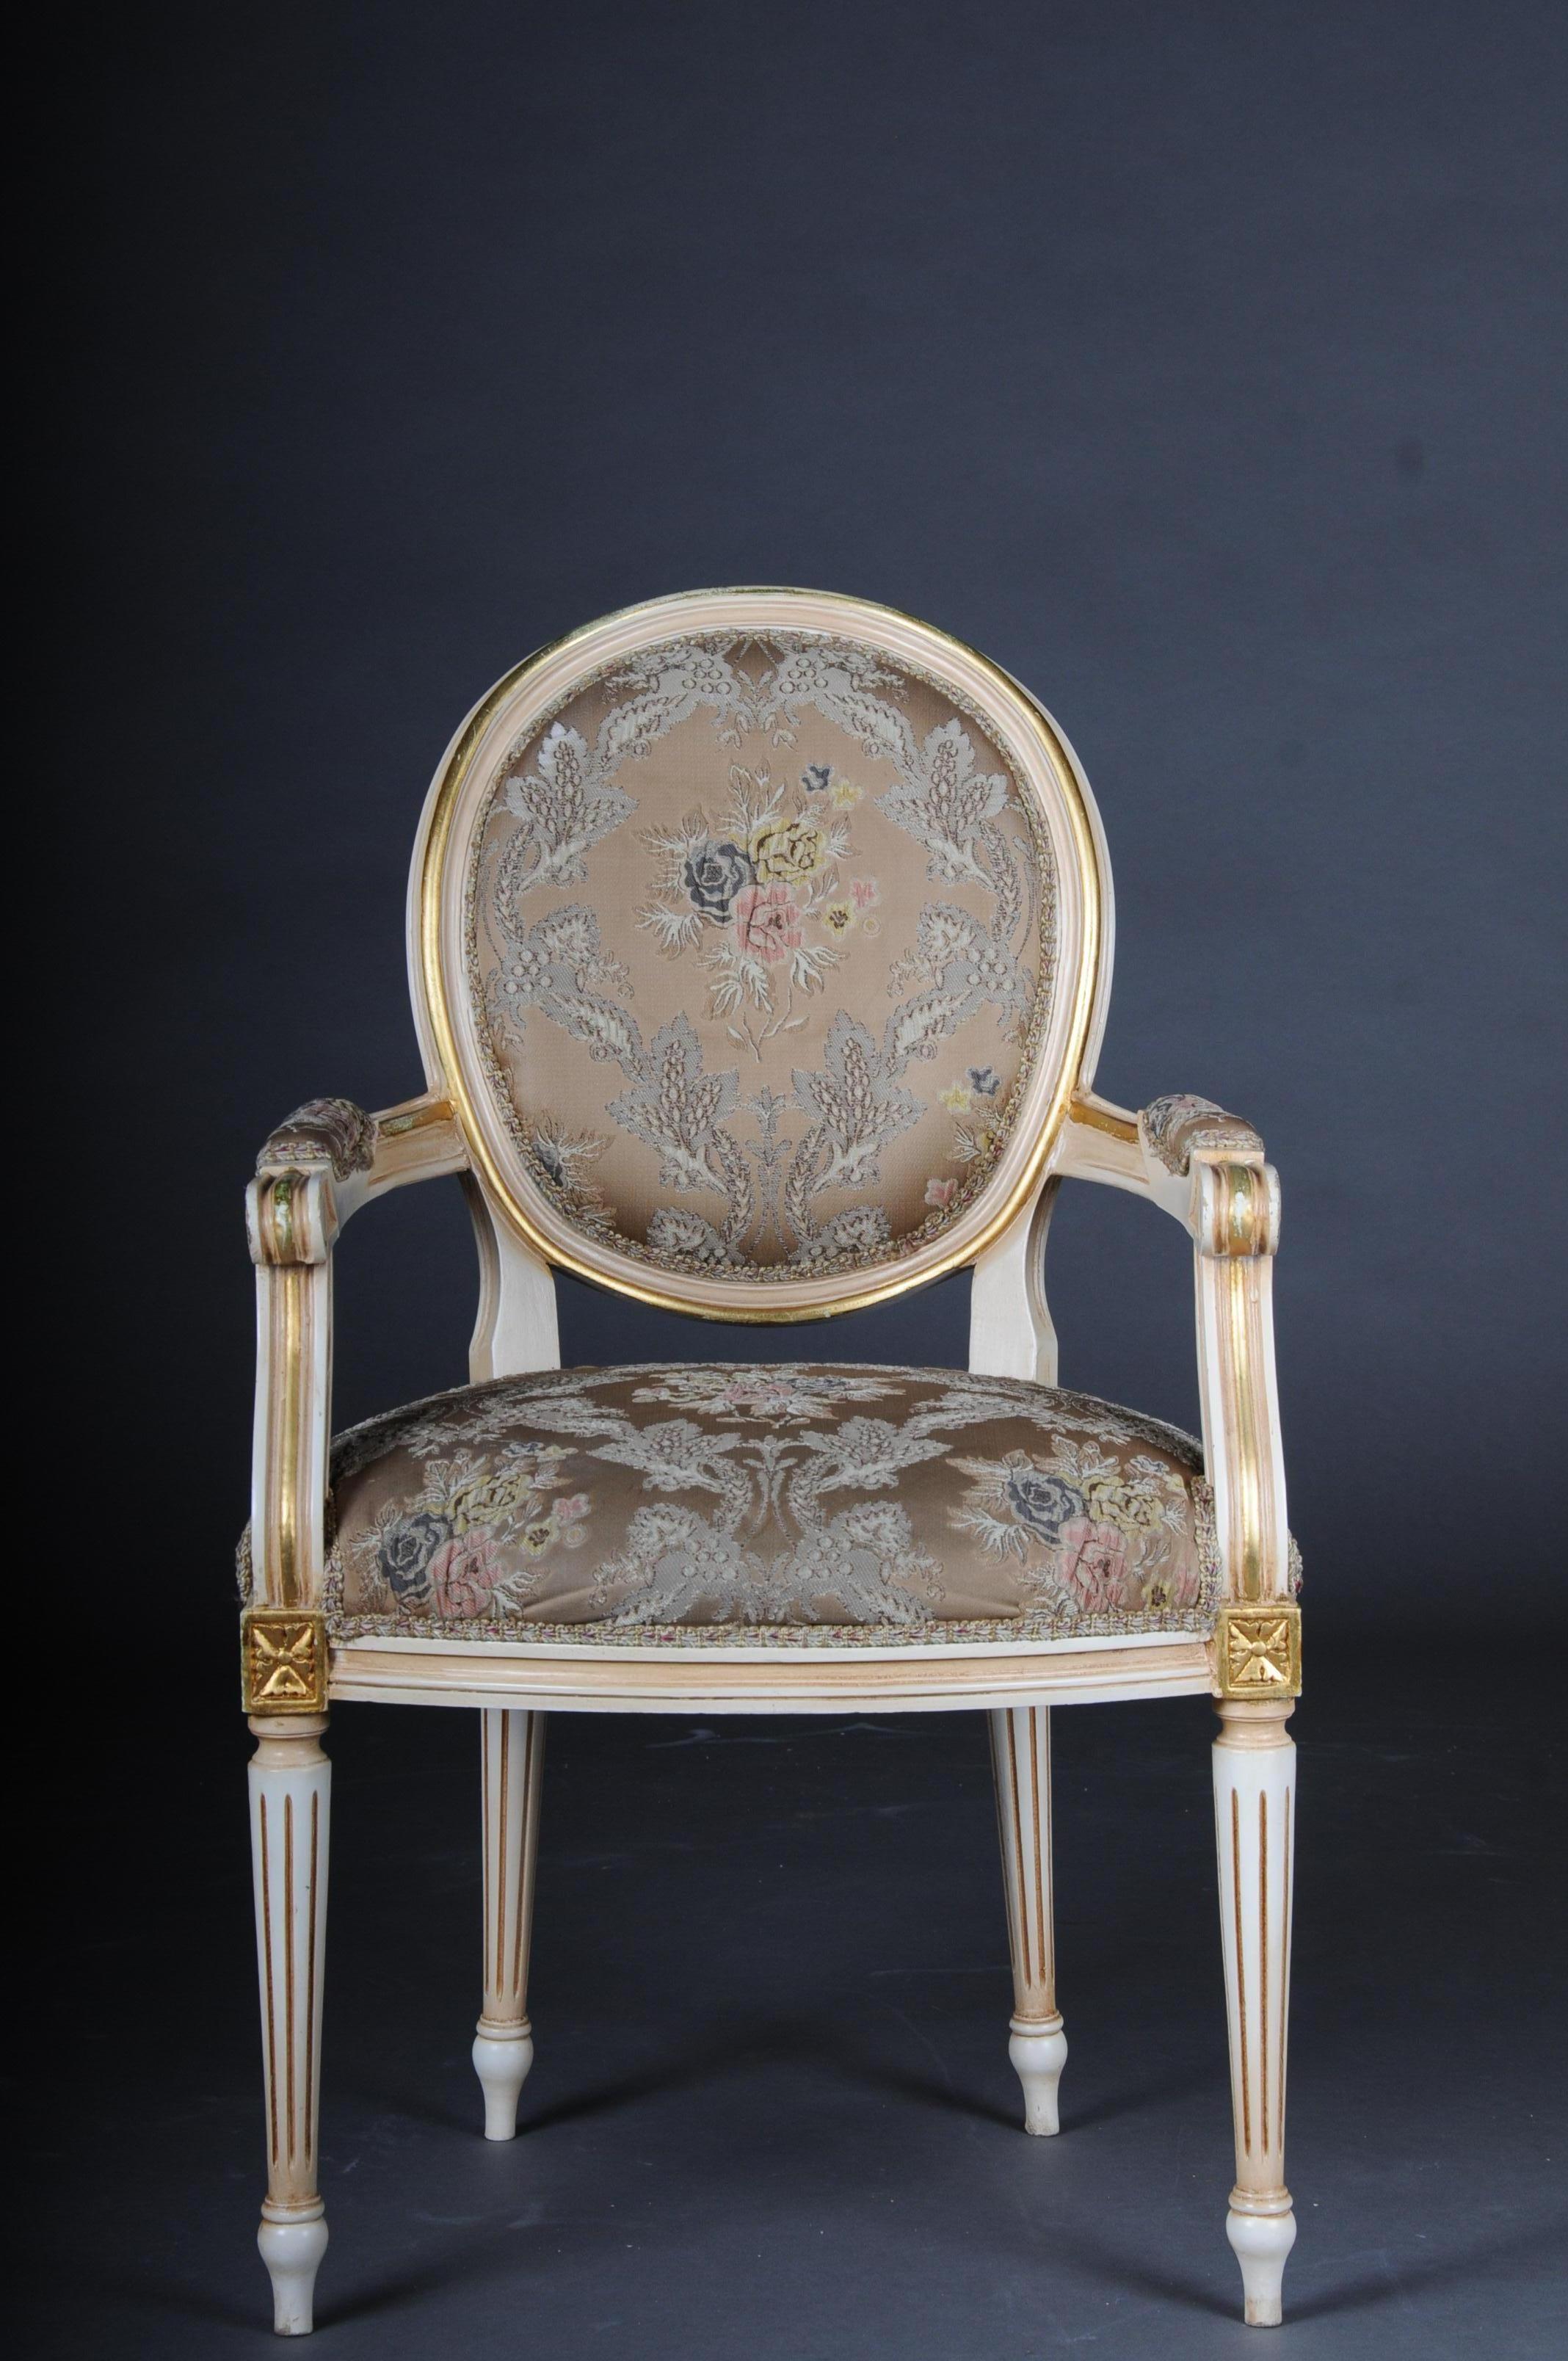 Classic Louis XVI armchair, 20th century

Solid wood, painted cream and partly gilded. Cambered and carved frame on curved feet.
The seat and backrest are finished with historical, Classic upholstery. Pointed legs. Width seat u. Upholstered